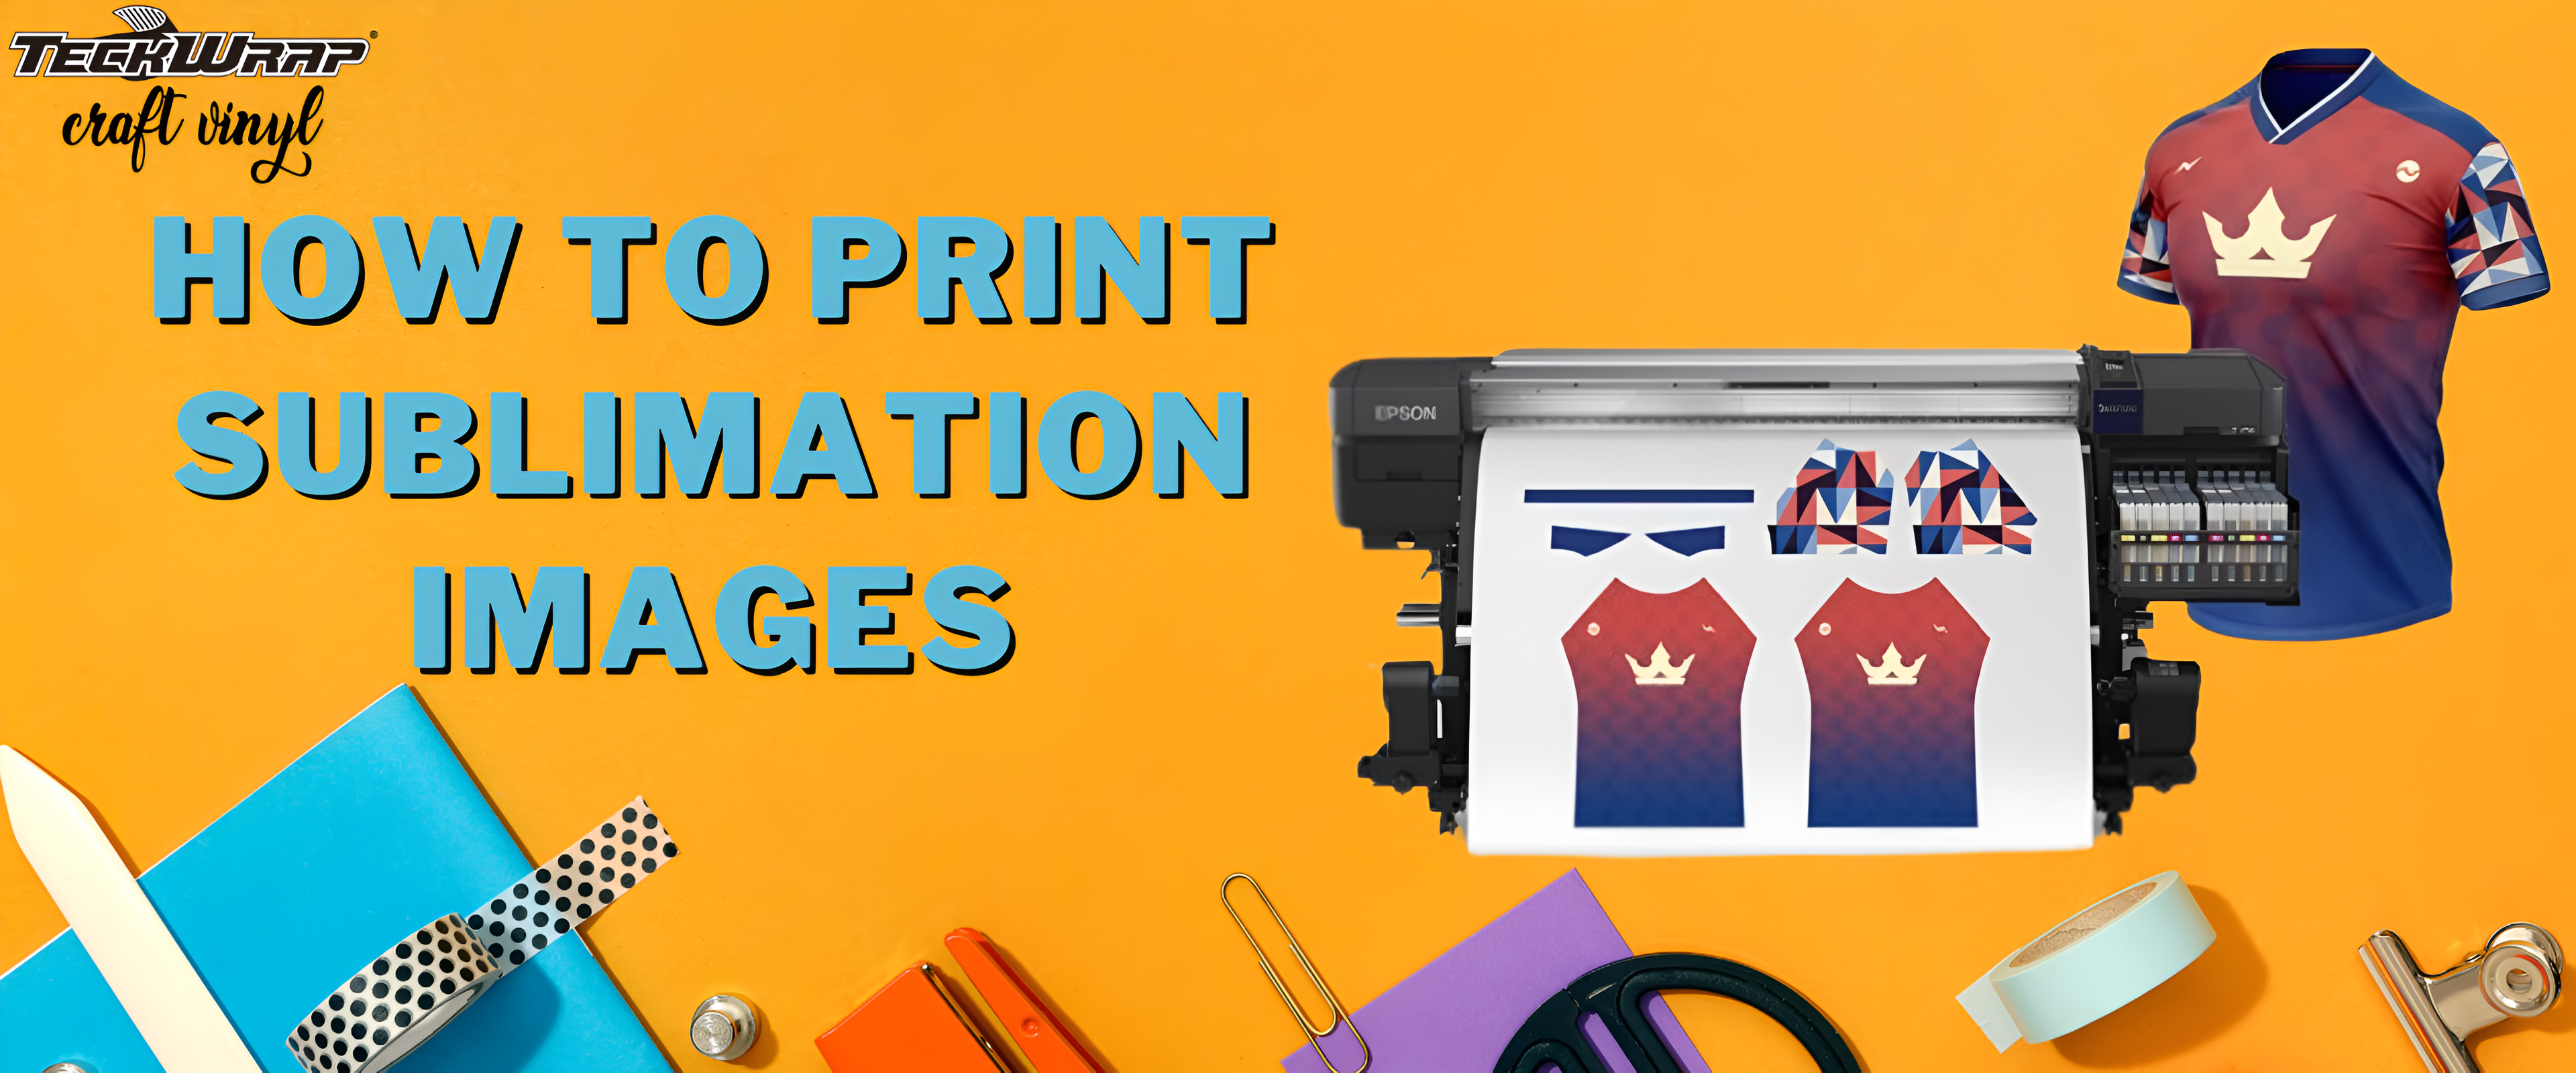 How to Print Sublimation Images (1) (1).png__PID:1535ee0f-f88f-4909-b7ec-9b29df3ea2d9